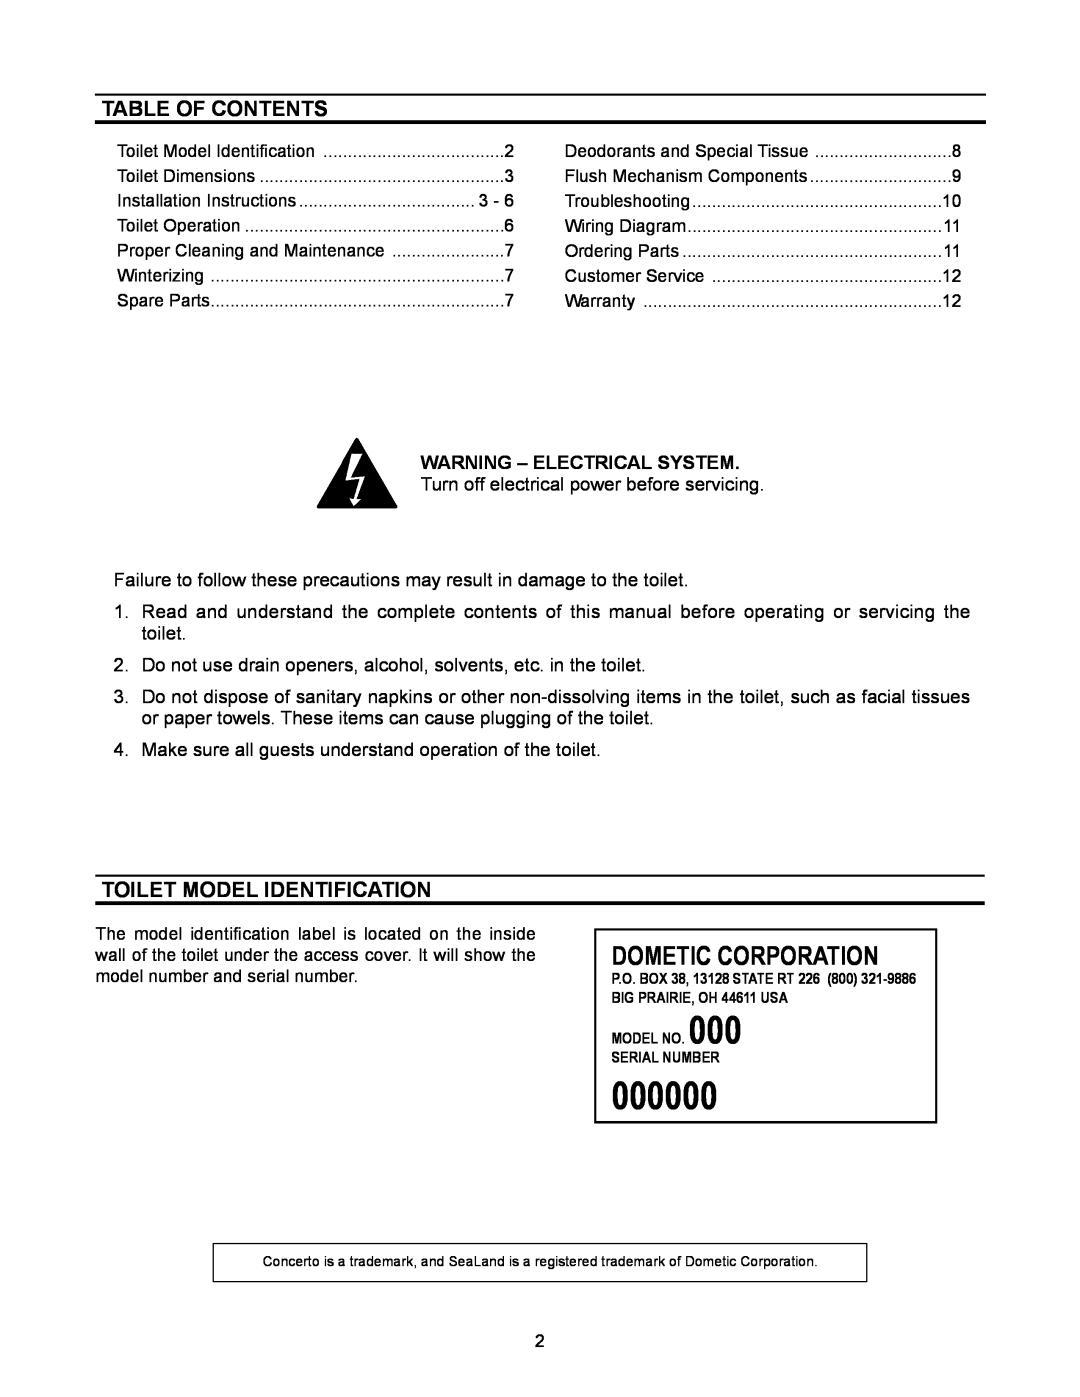 Dometic 3200 Series owner manual Table of Contents, Toilet Model Identification, 000000, Dometic Corporation 